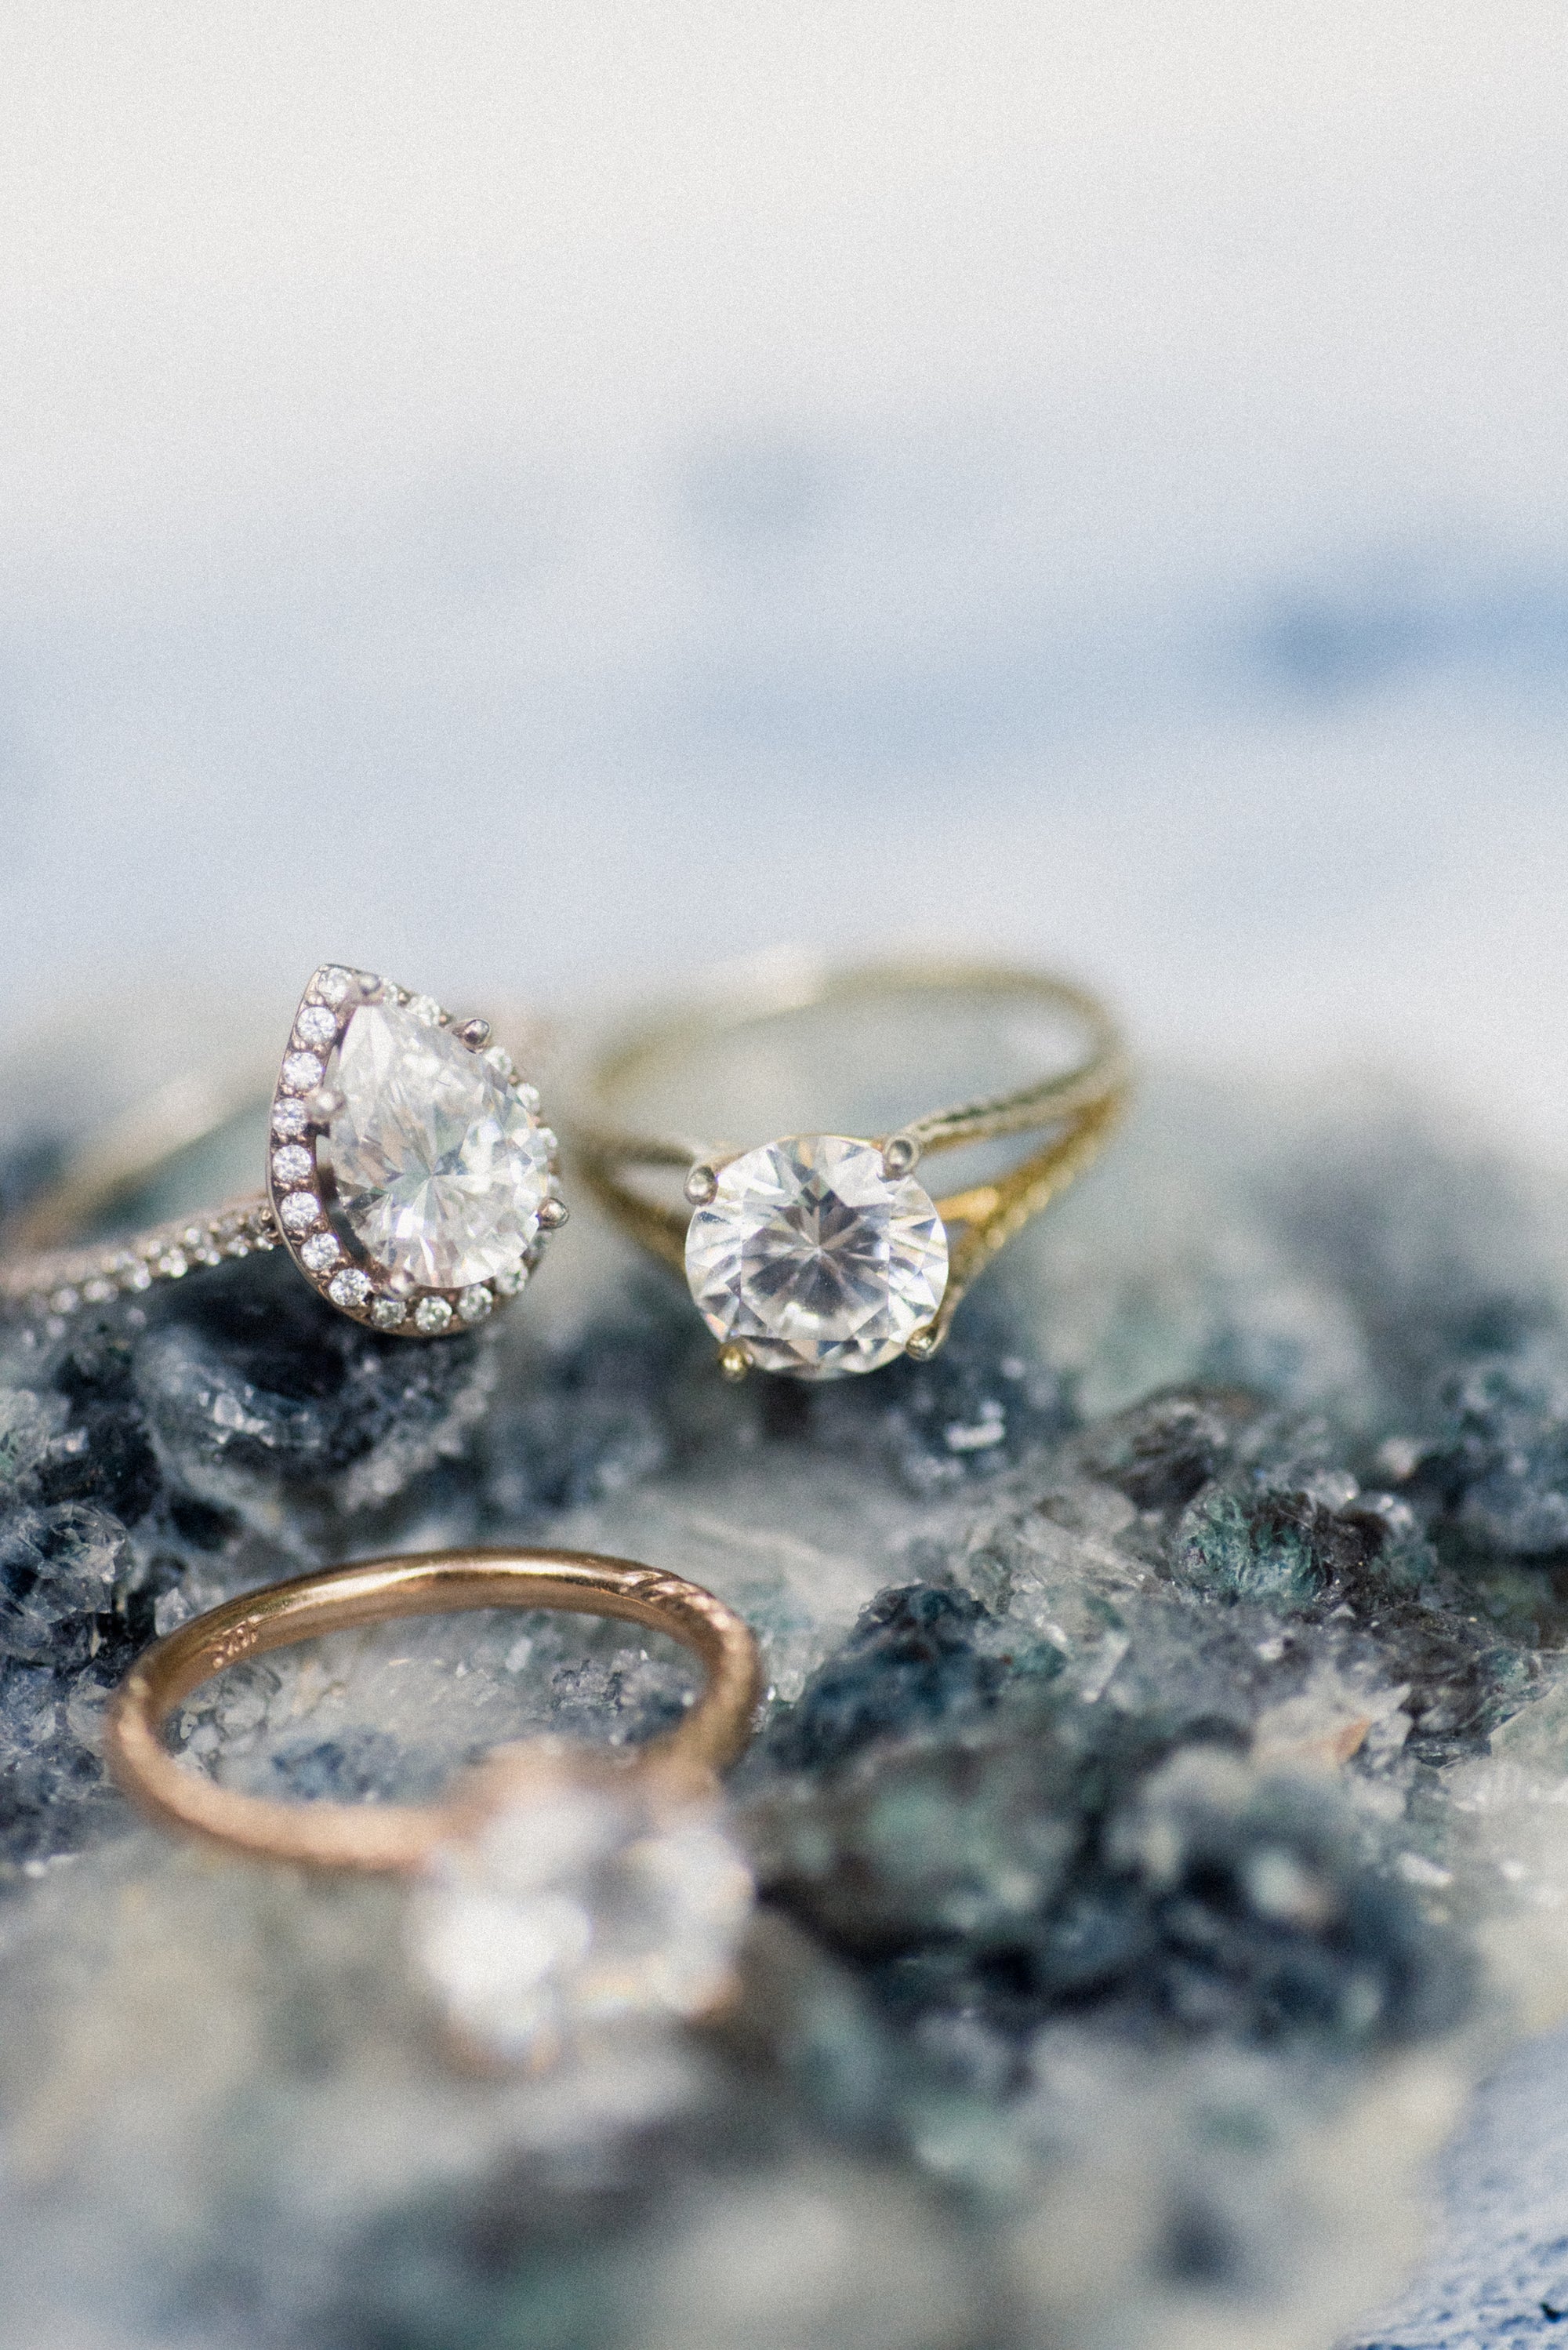 How to Keep Your Engagement Ring and Wedding Bands Clean | Jeweler in Philadelphia Gives Tips on how to keep jewelry clean